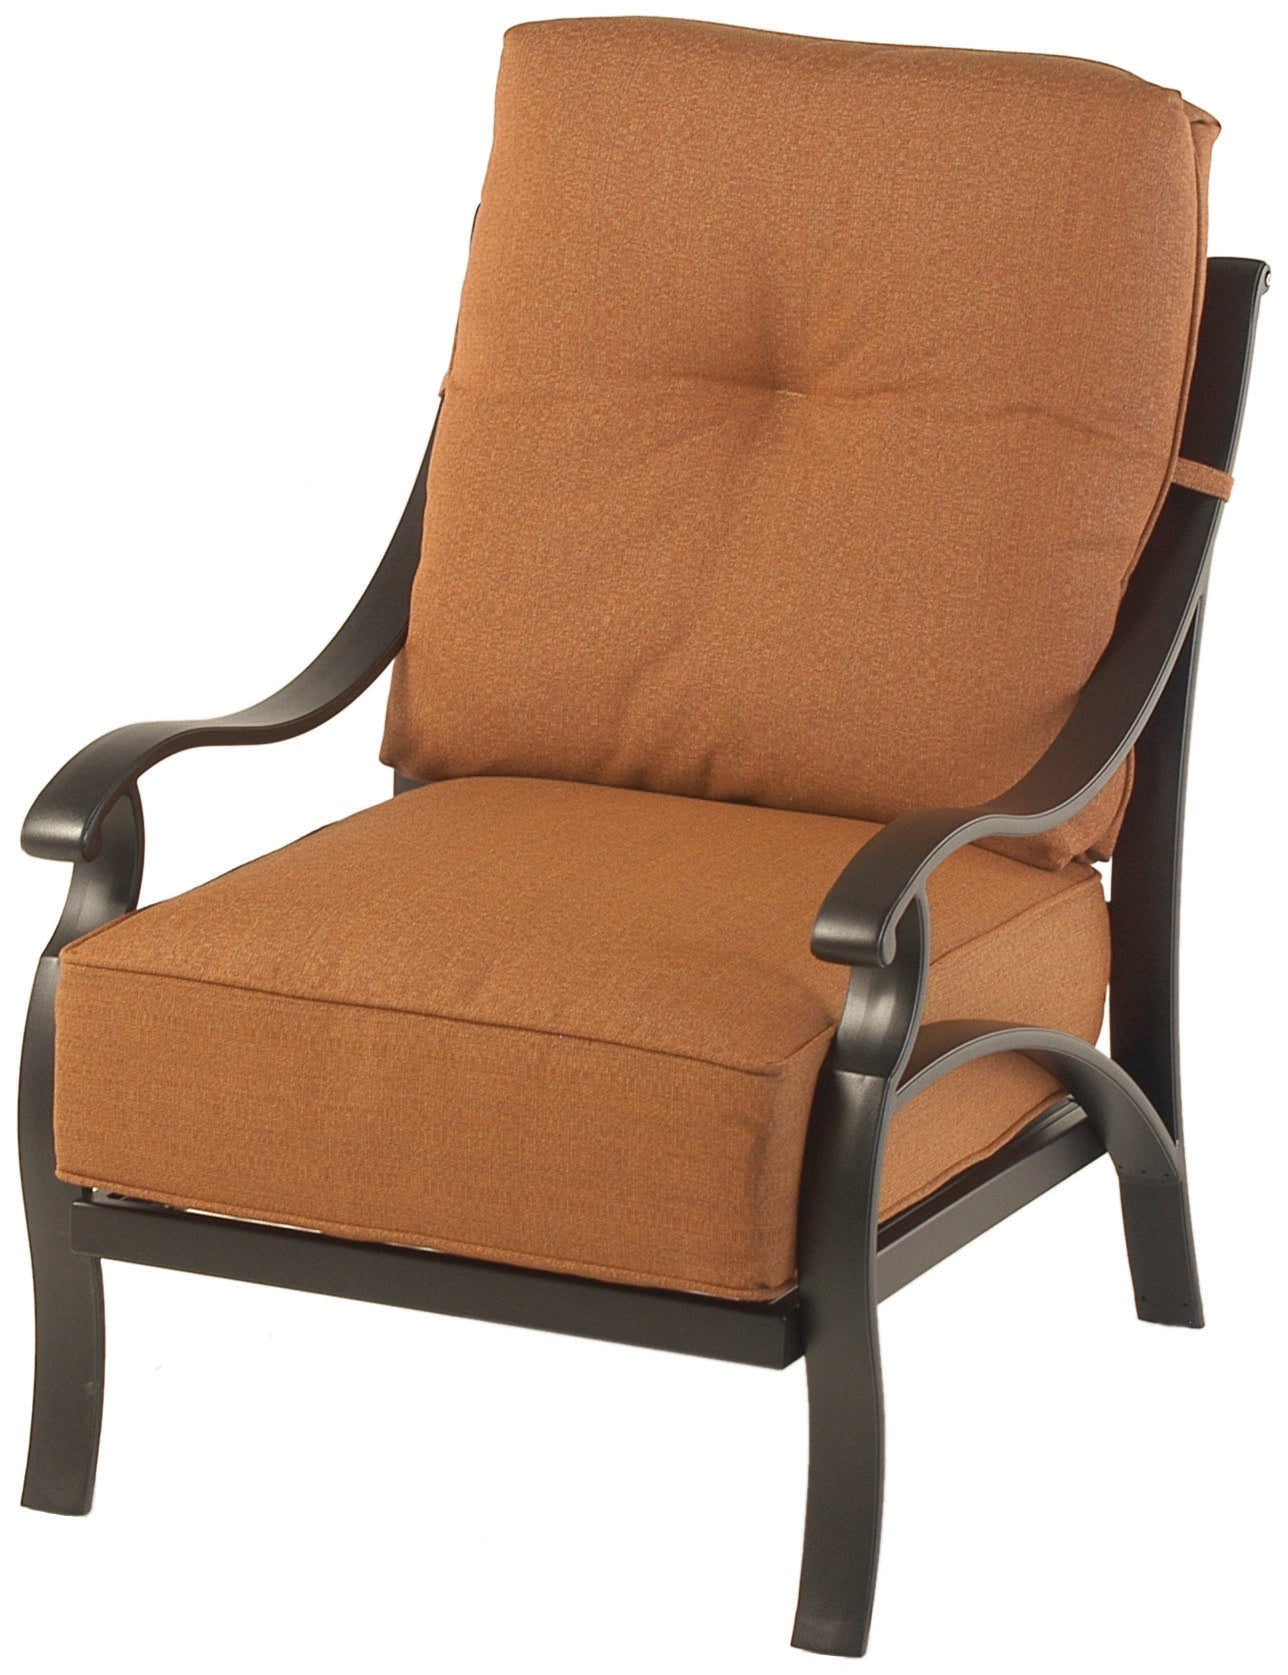 Mayfair & Stratford Chair Seat Replacement Cushion By Hanamint On Sale  $80.00